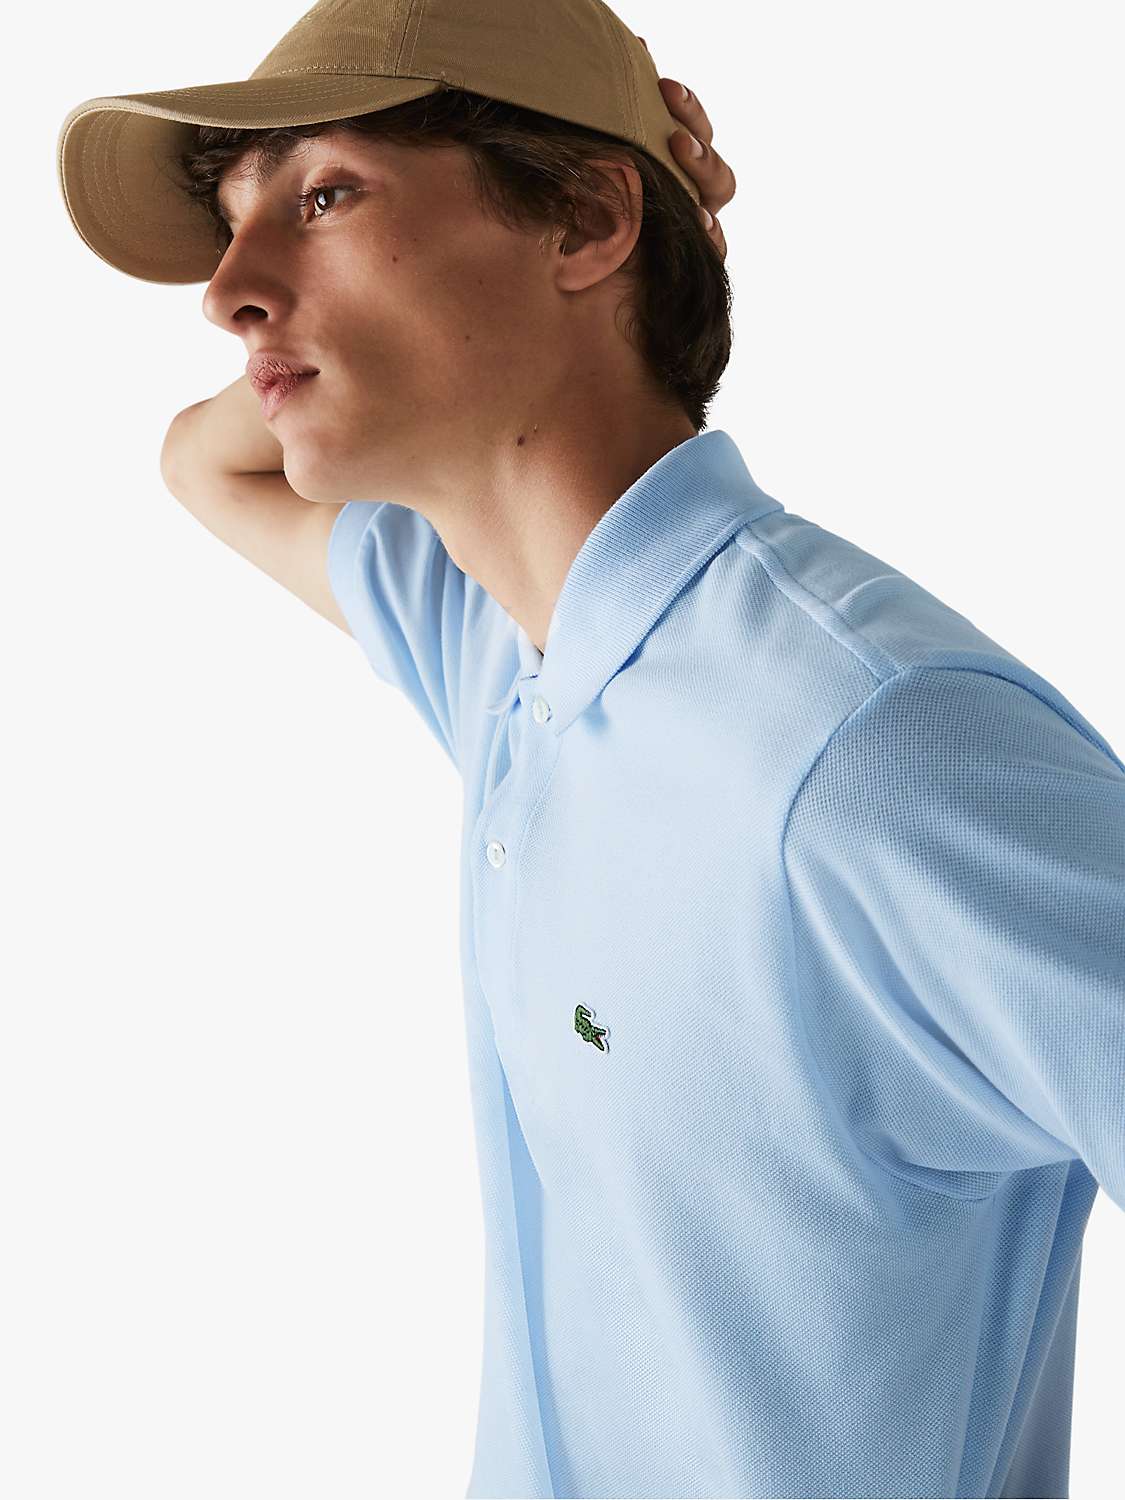 Buy Lacoste Classic Fit Logo Polo Shirt Online at johnlewis.com